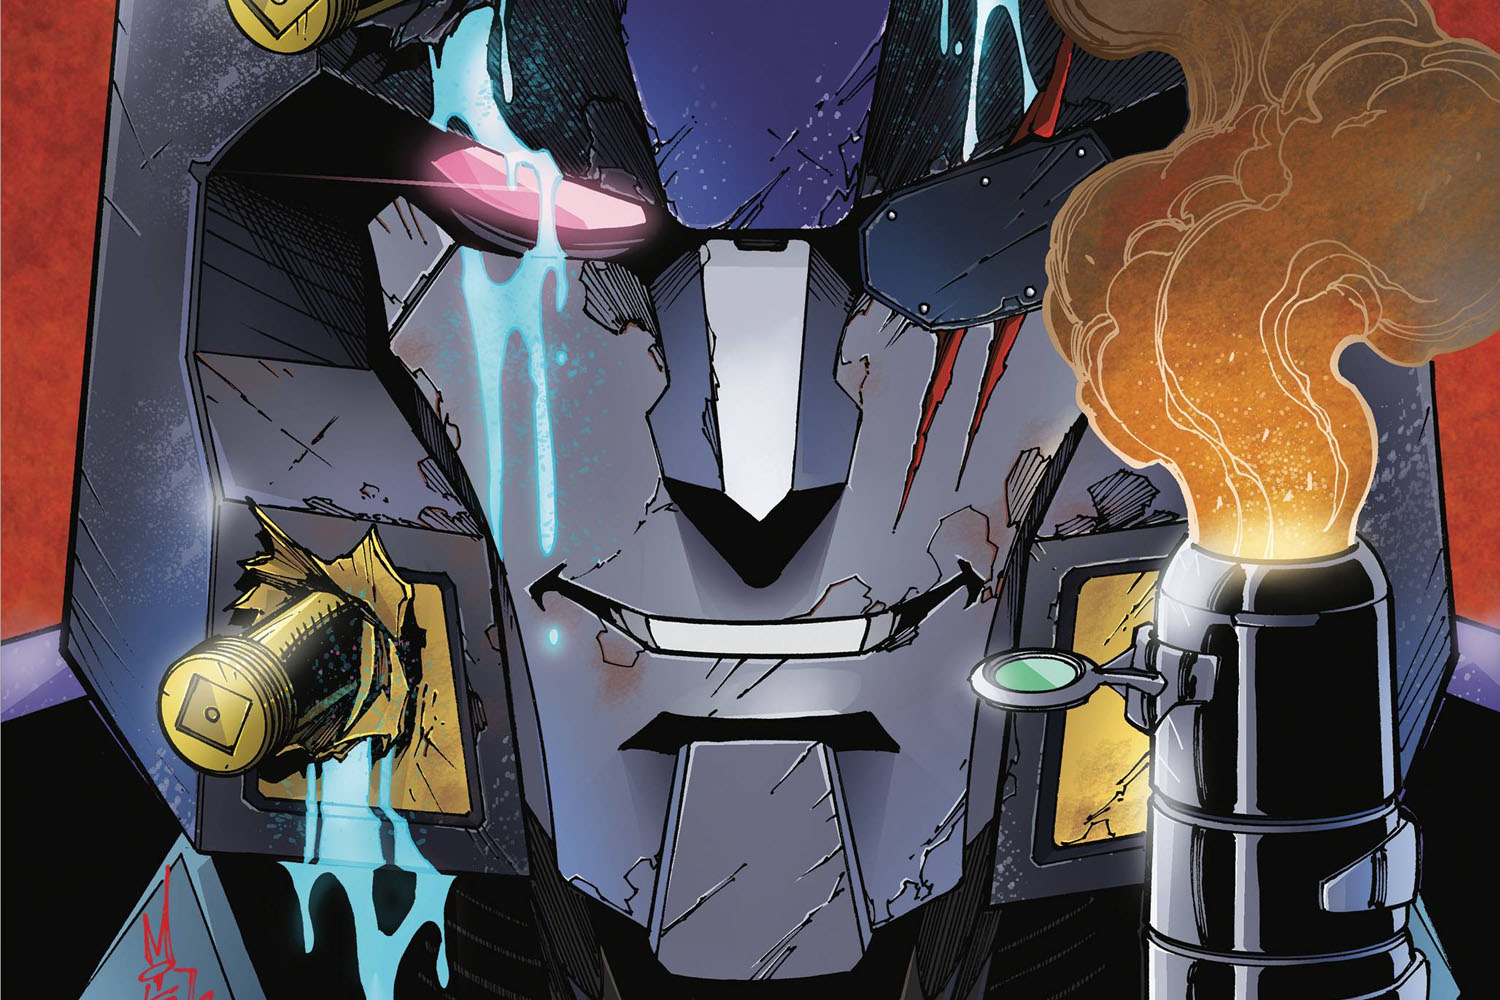 'Transformers: Shattered Glass' #1 kicks off the mirror universe in a big way